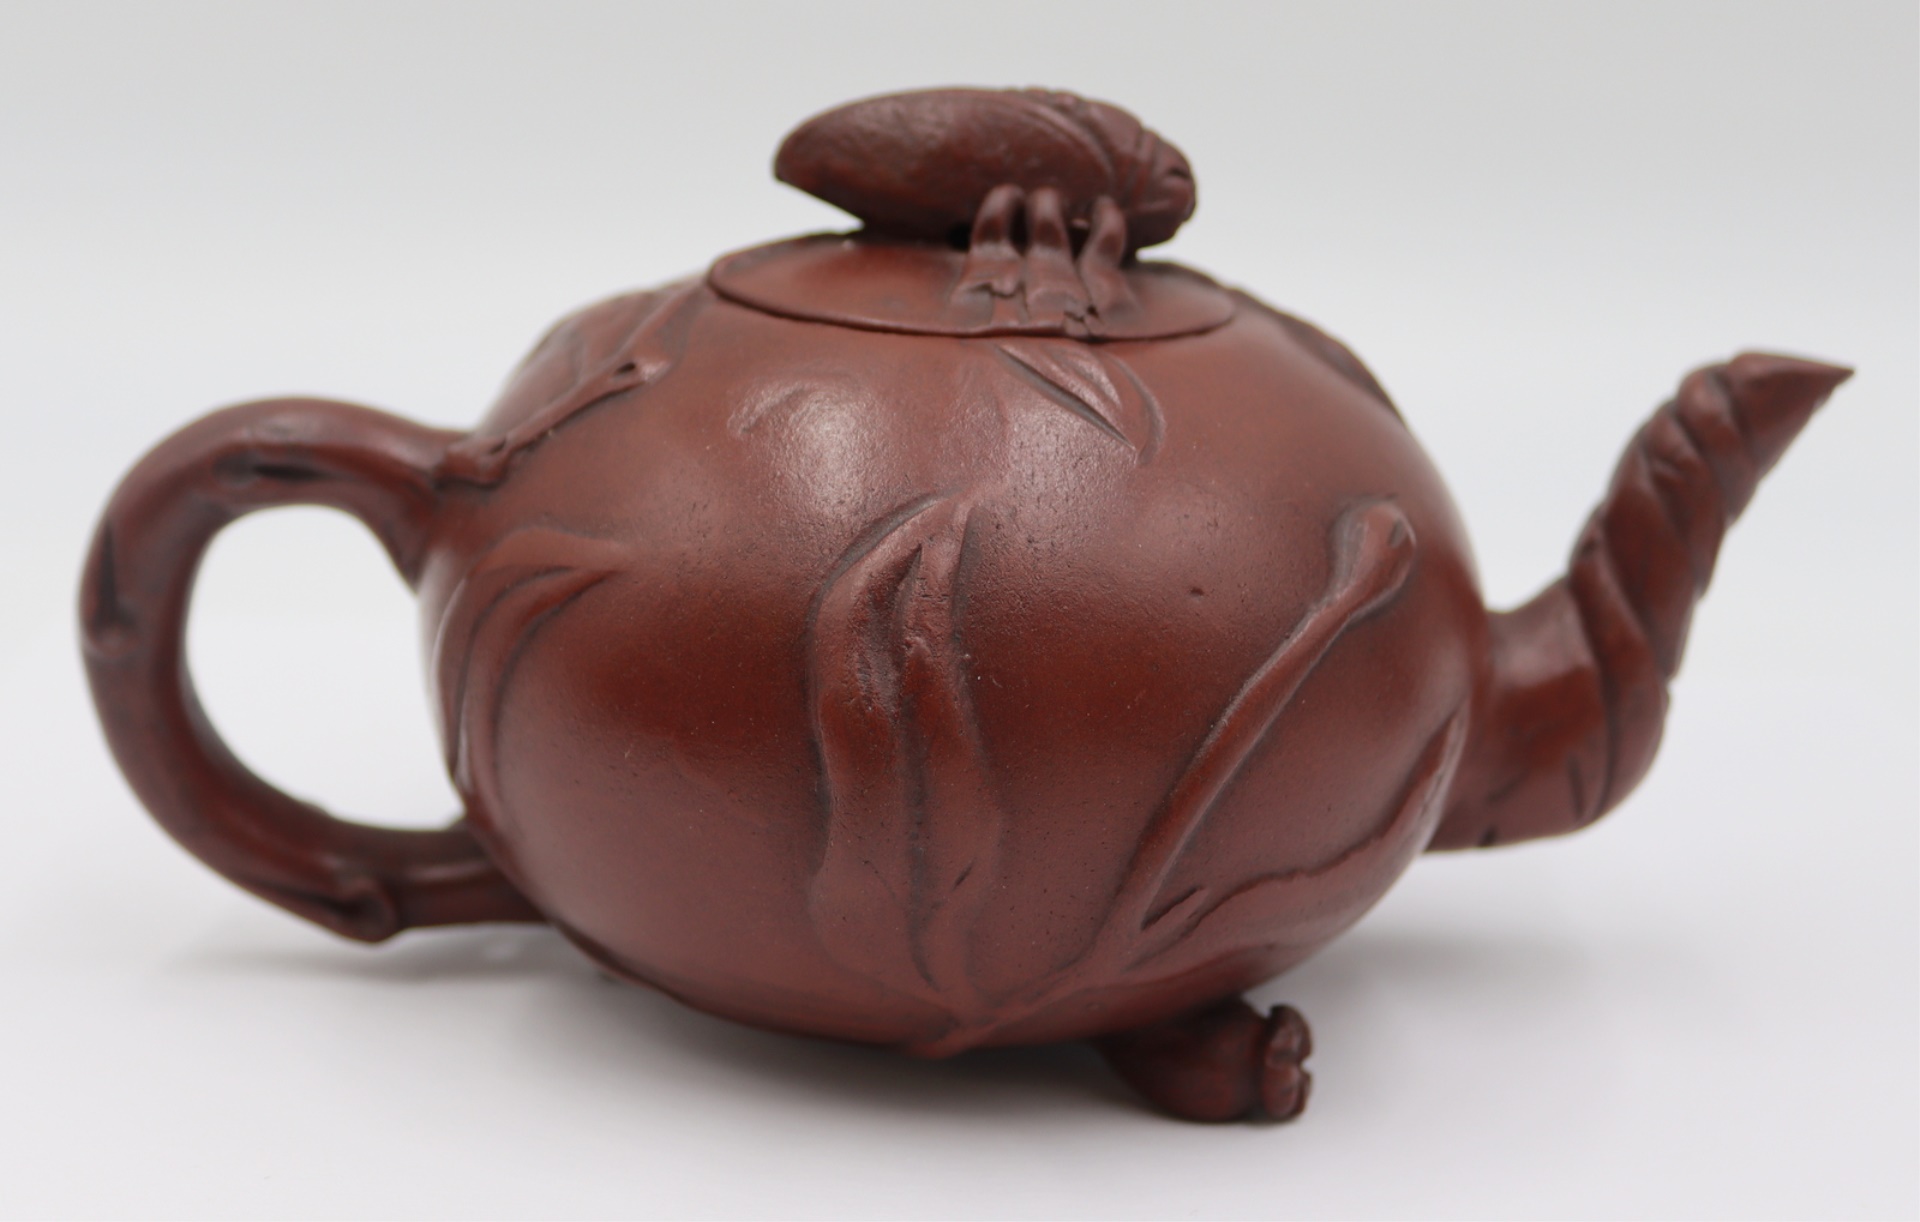 SIGNED CHINESE YIXING TEAPOT. Decorated